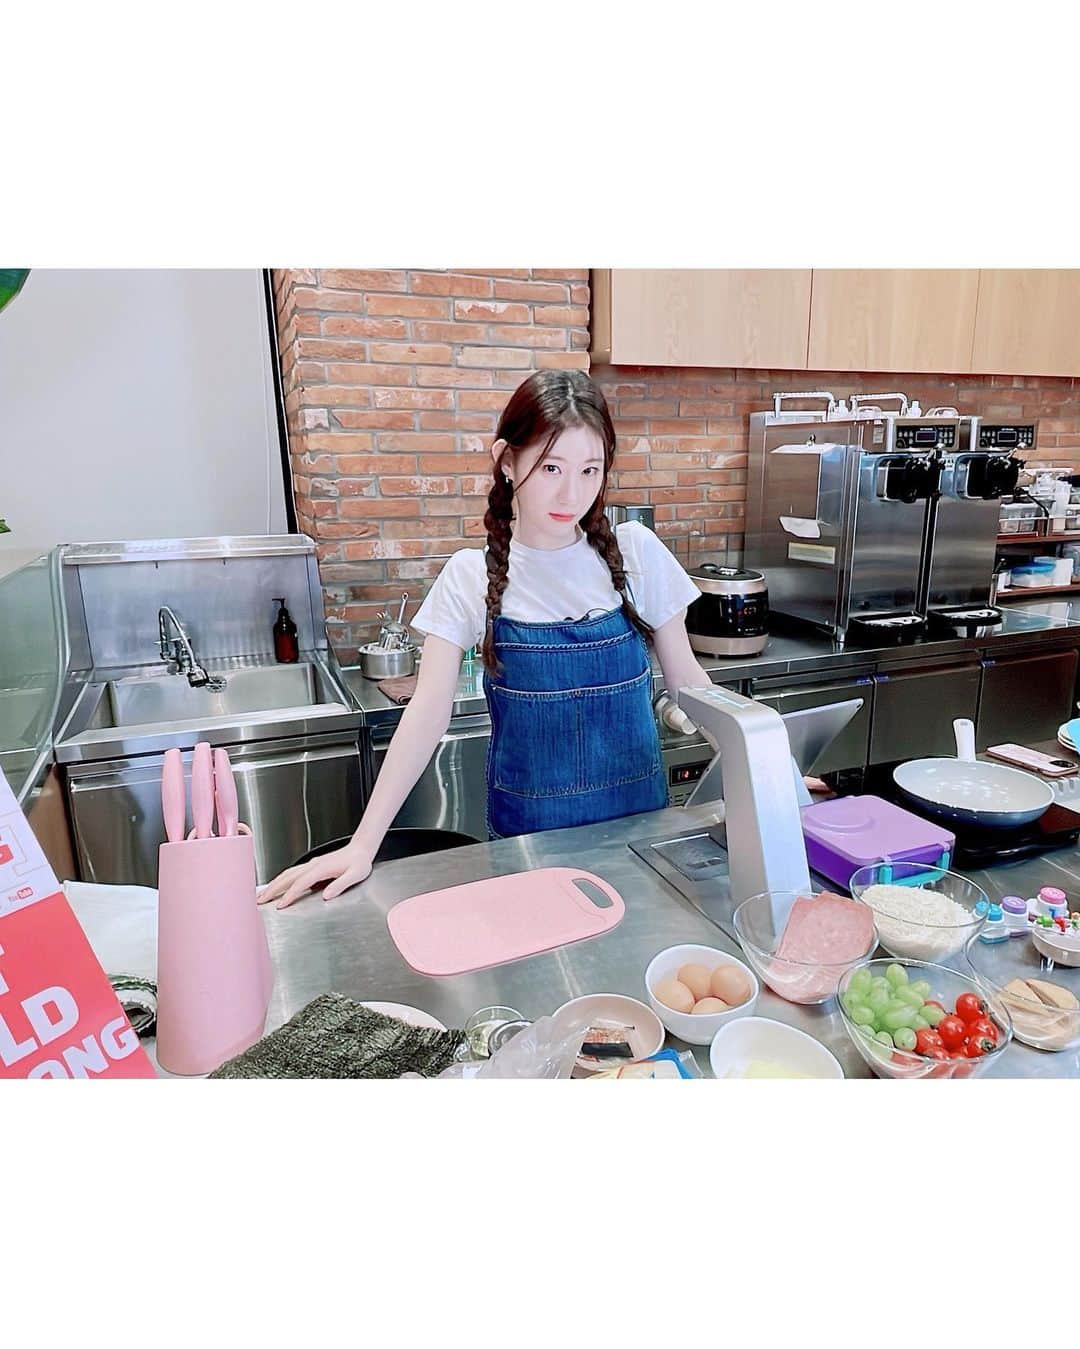 ITZYさんのインスタグラム写真 - (ITZYInstagram)「[🔴LIVE]   믿지의 사연 한 스푼을 담은 채령이의 일요식당! 오늘은 #챌봄박스  👊MISSION👊 믿지의 #챌봄박스 도전! MIDZY's #ChaelBOMBOXX challenge!  아래 해시태그와 함께 인증😎 Upload your BOMBOXX with hashtags below😎  #챌봄박스 #ChaelBOMBOXX  🍳Part 1 https://youtu.be/jRW8mtvNHD8 🍳Part 2 https://youtu.be/DazD5XyobrE  #챌봄박스 레시피  1. 테두리 자른 식빵 준비!🍞 2. 식빵 위에 딸기잼&치즈&햄 얹고 식빵 덮덮X2!🍓🧀 3. 계란물, 빵가루 묻혀 약불에 잘 구워주면 몬테크리스토 끝🥪 4. 밥에 단촛물로 간하여 유부에 넣어 유부초밥도 꾹꾹🍚💕 5. 좋아하는 과일과 함께 예쁘게 도시락에 담으면 완성🍱  Recipe for #ChaelBOMBOXX  1. Prepare bread with the edges cut!🍞 2. Strawberry jam&cheese&ham between breads!🍓🧀 3. Cover with bread crumbs after dipping in stirred egg, and toast it! 4. Fill Yubu with seasoned rice🍚💕 5. Put everything in the box with favorite fruits!  #쩝쩝박사_있지가_믿지에게 #요란요란 #EATZY」5月8日 19時47分 - itzy.all.in.us